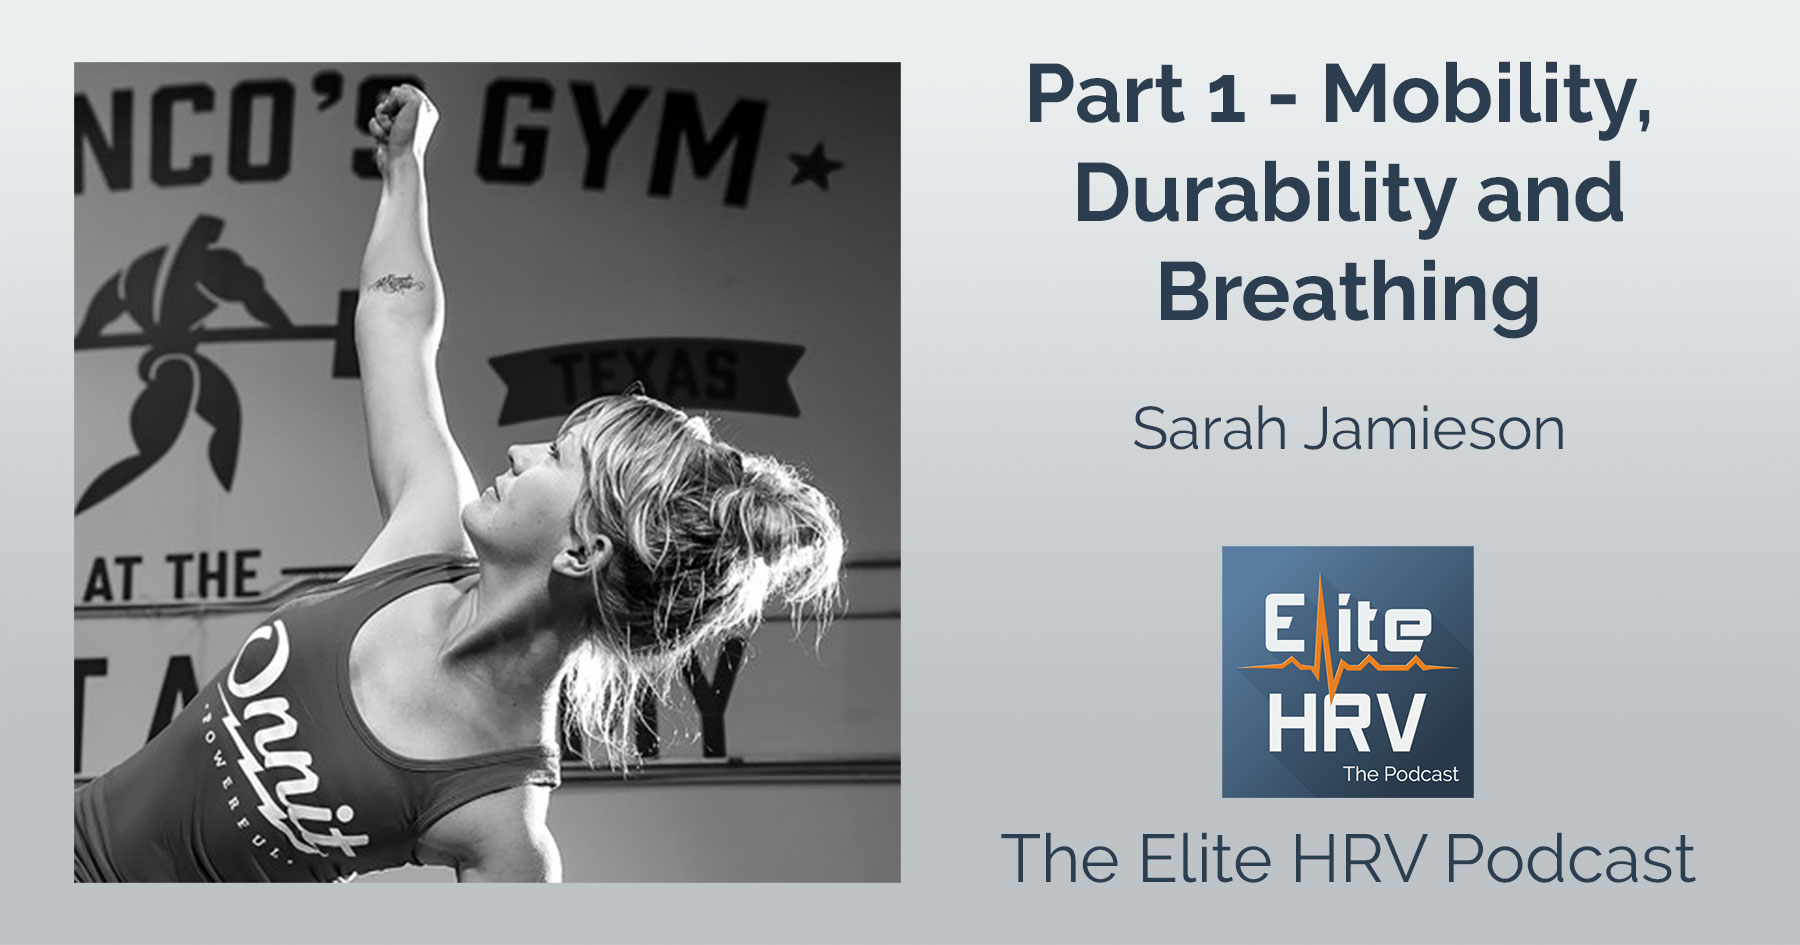 Mobility, Durability and Breathing with Sarah Jamieson – Part 1